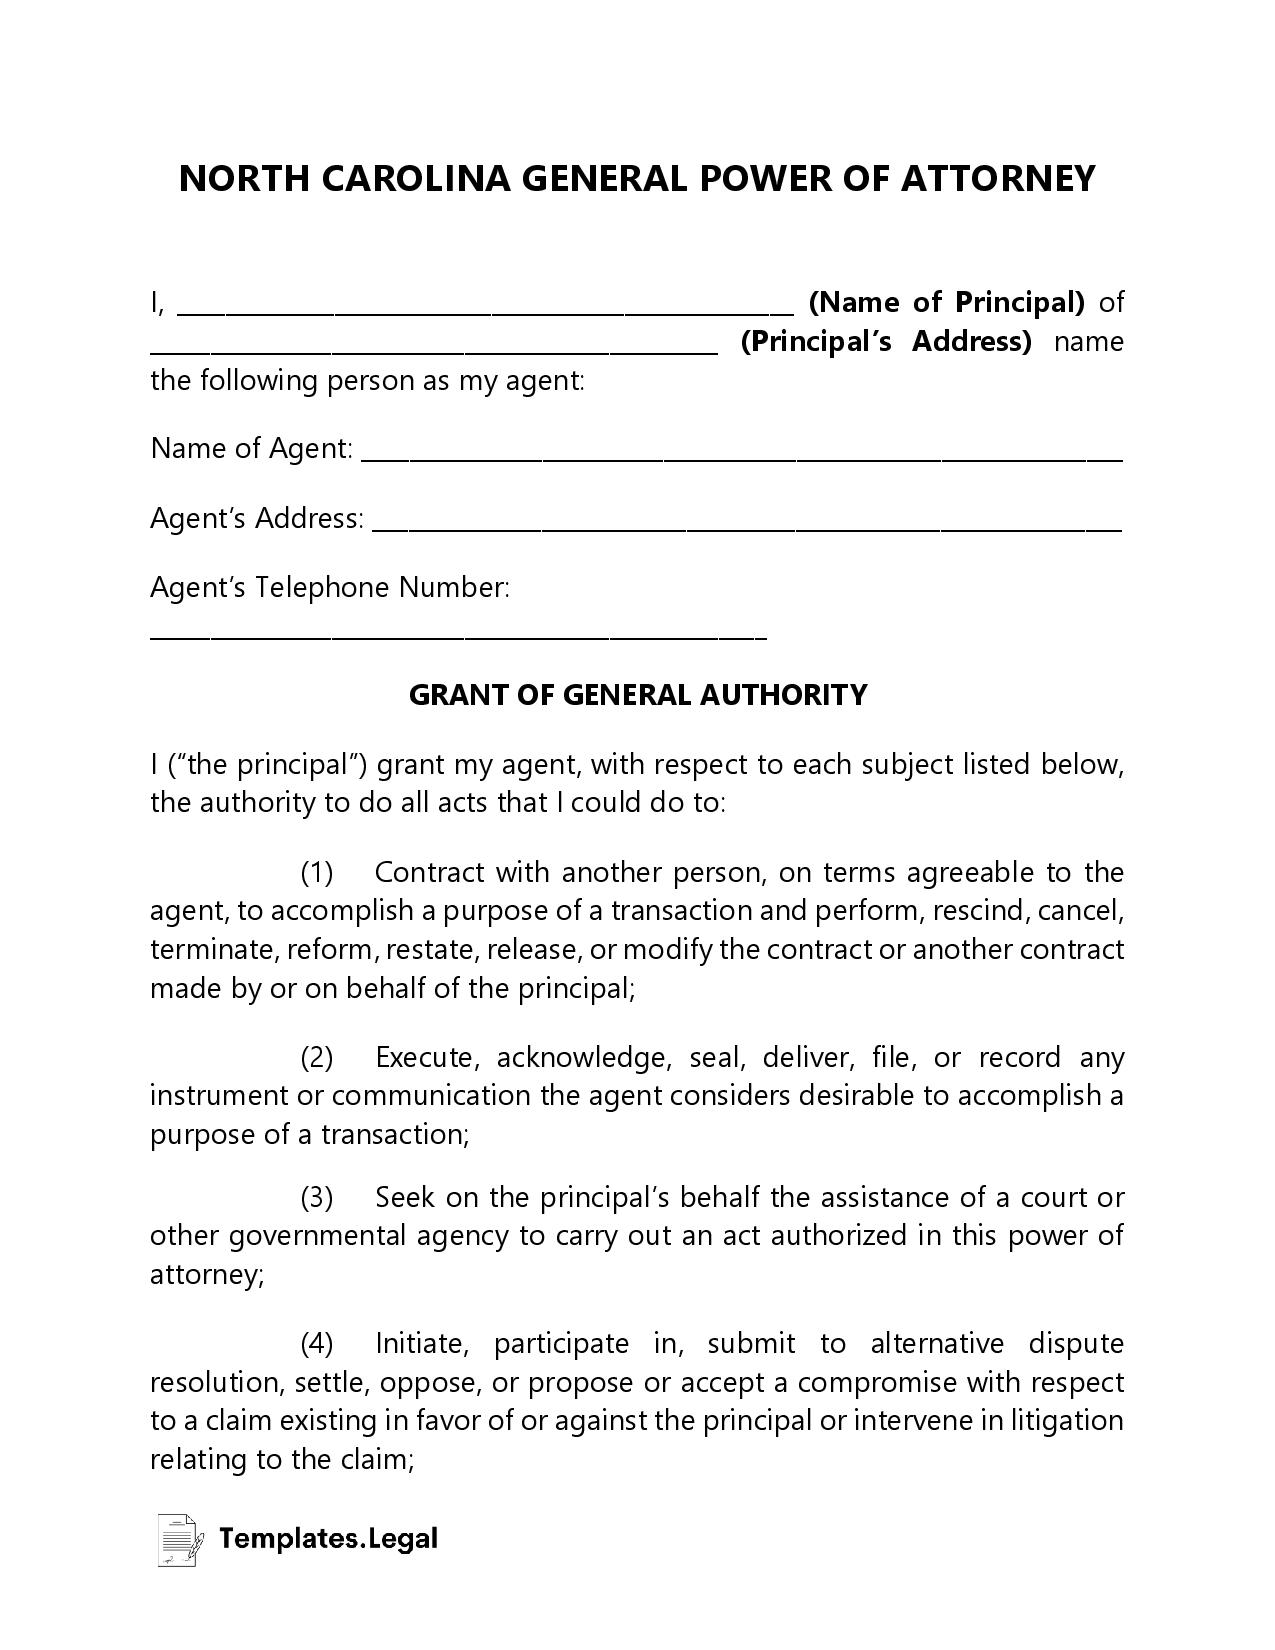 North Carolina General Power of Attorney - Templates.Legal